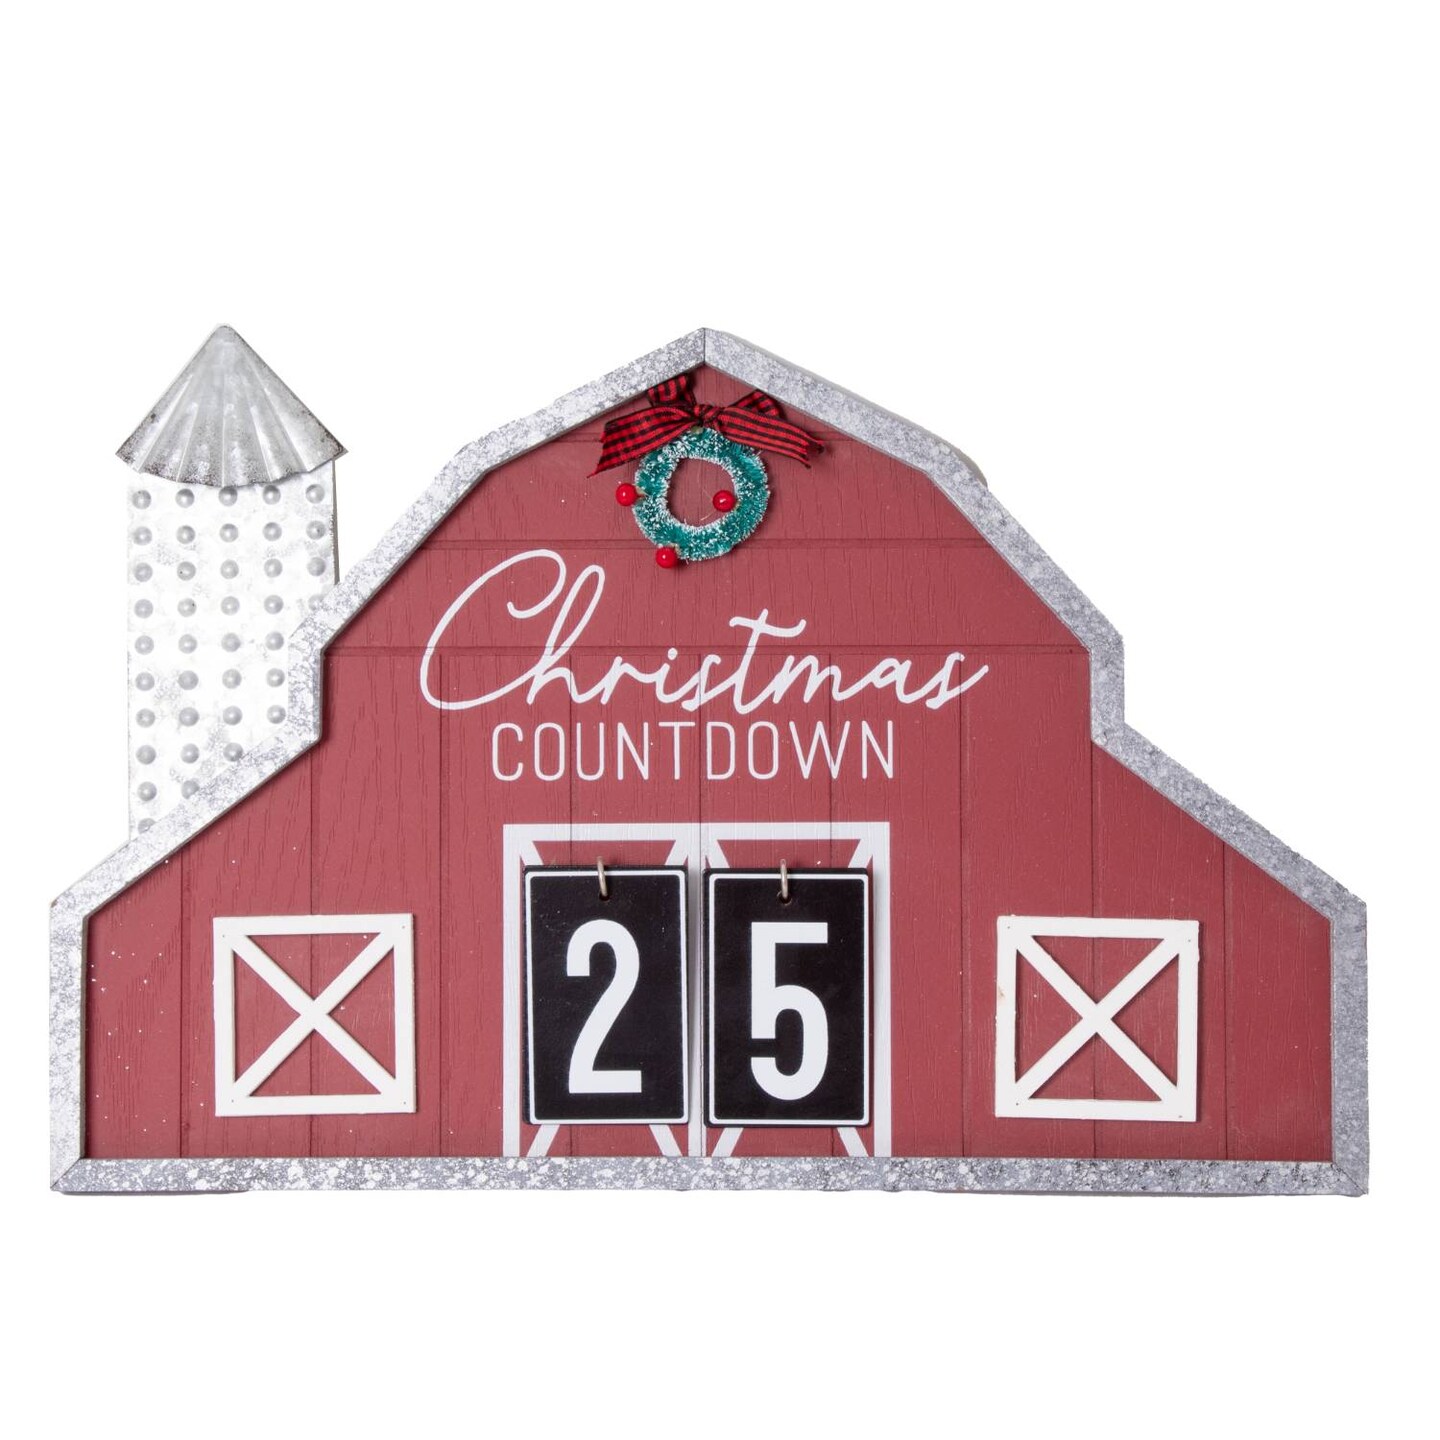 Gerson Wooden Barn Christmas Countdown Decor for Advent, Red Barn with Metal Silo Farmhouse Style Holiday Decor